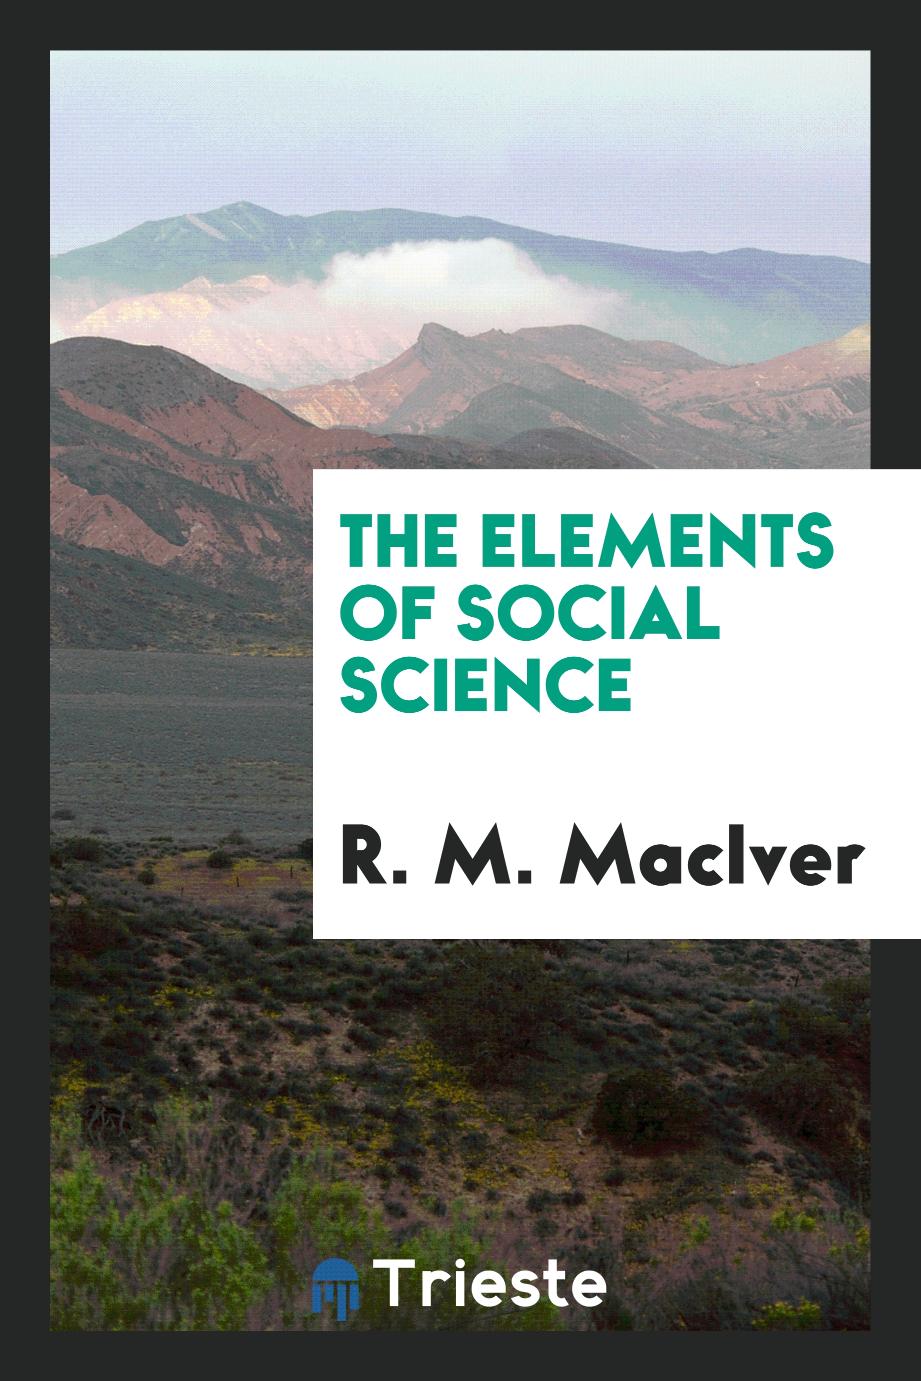 The elements of social science